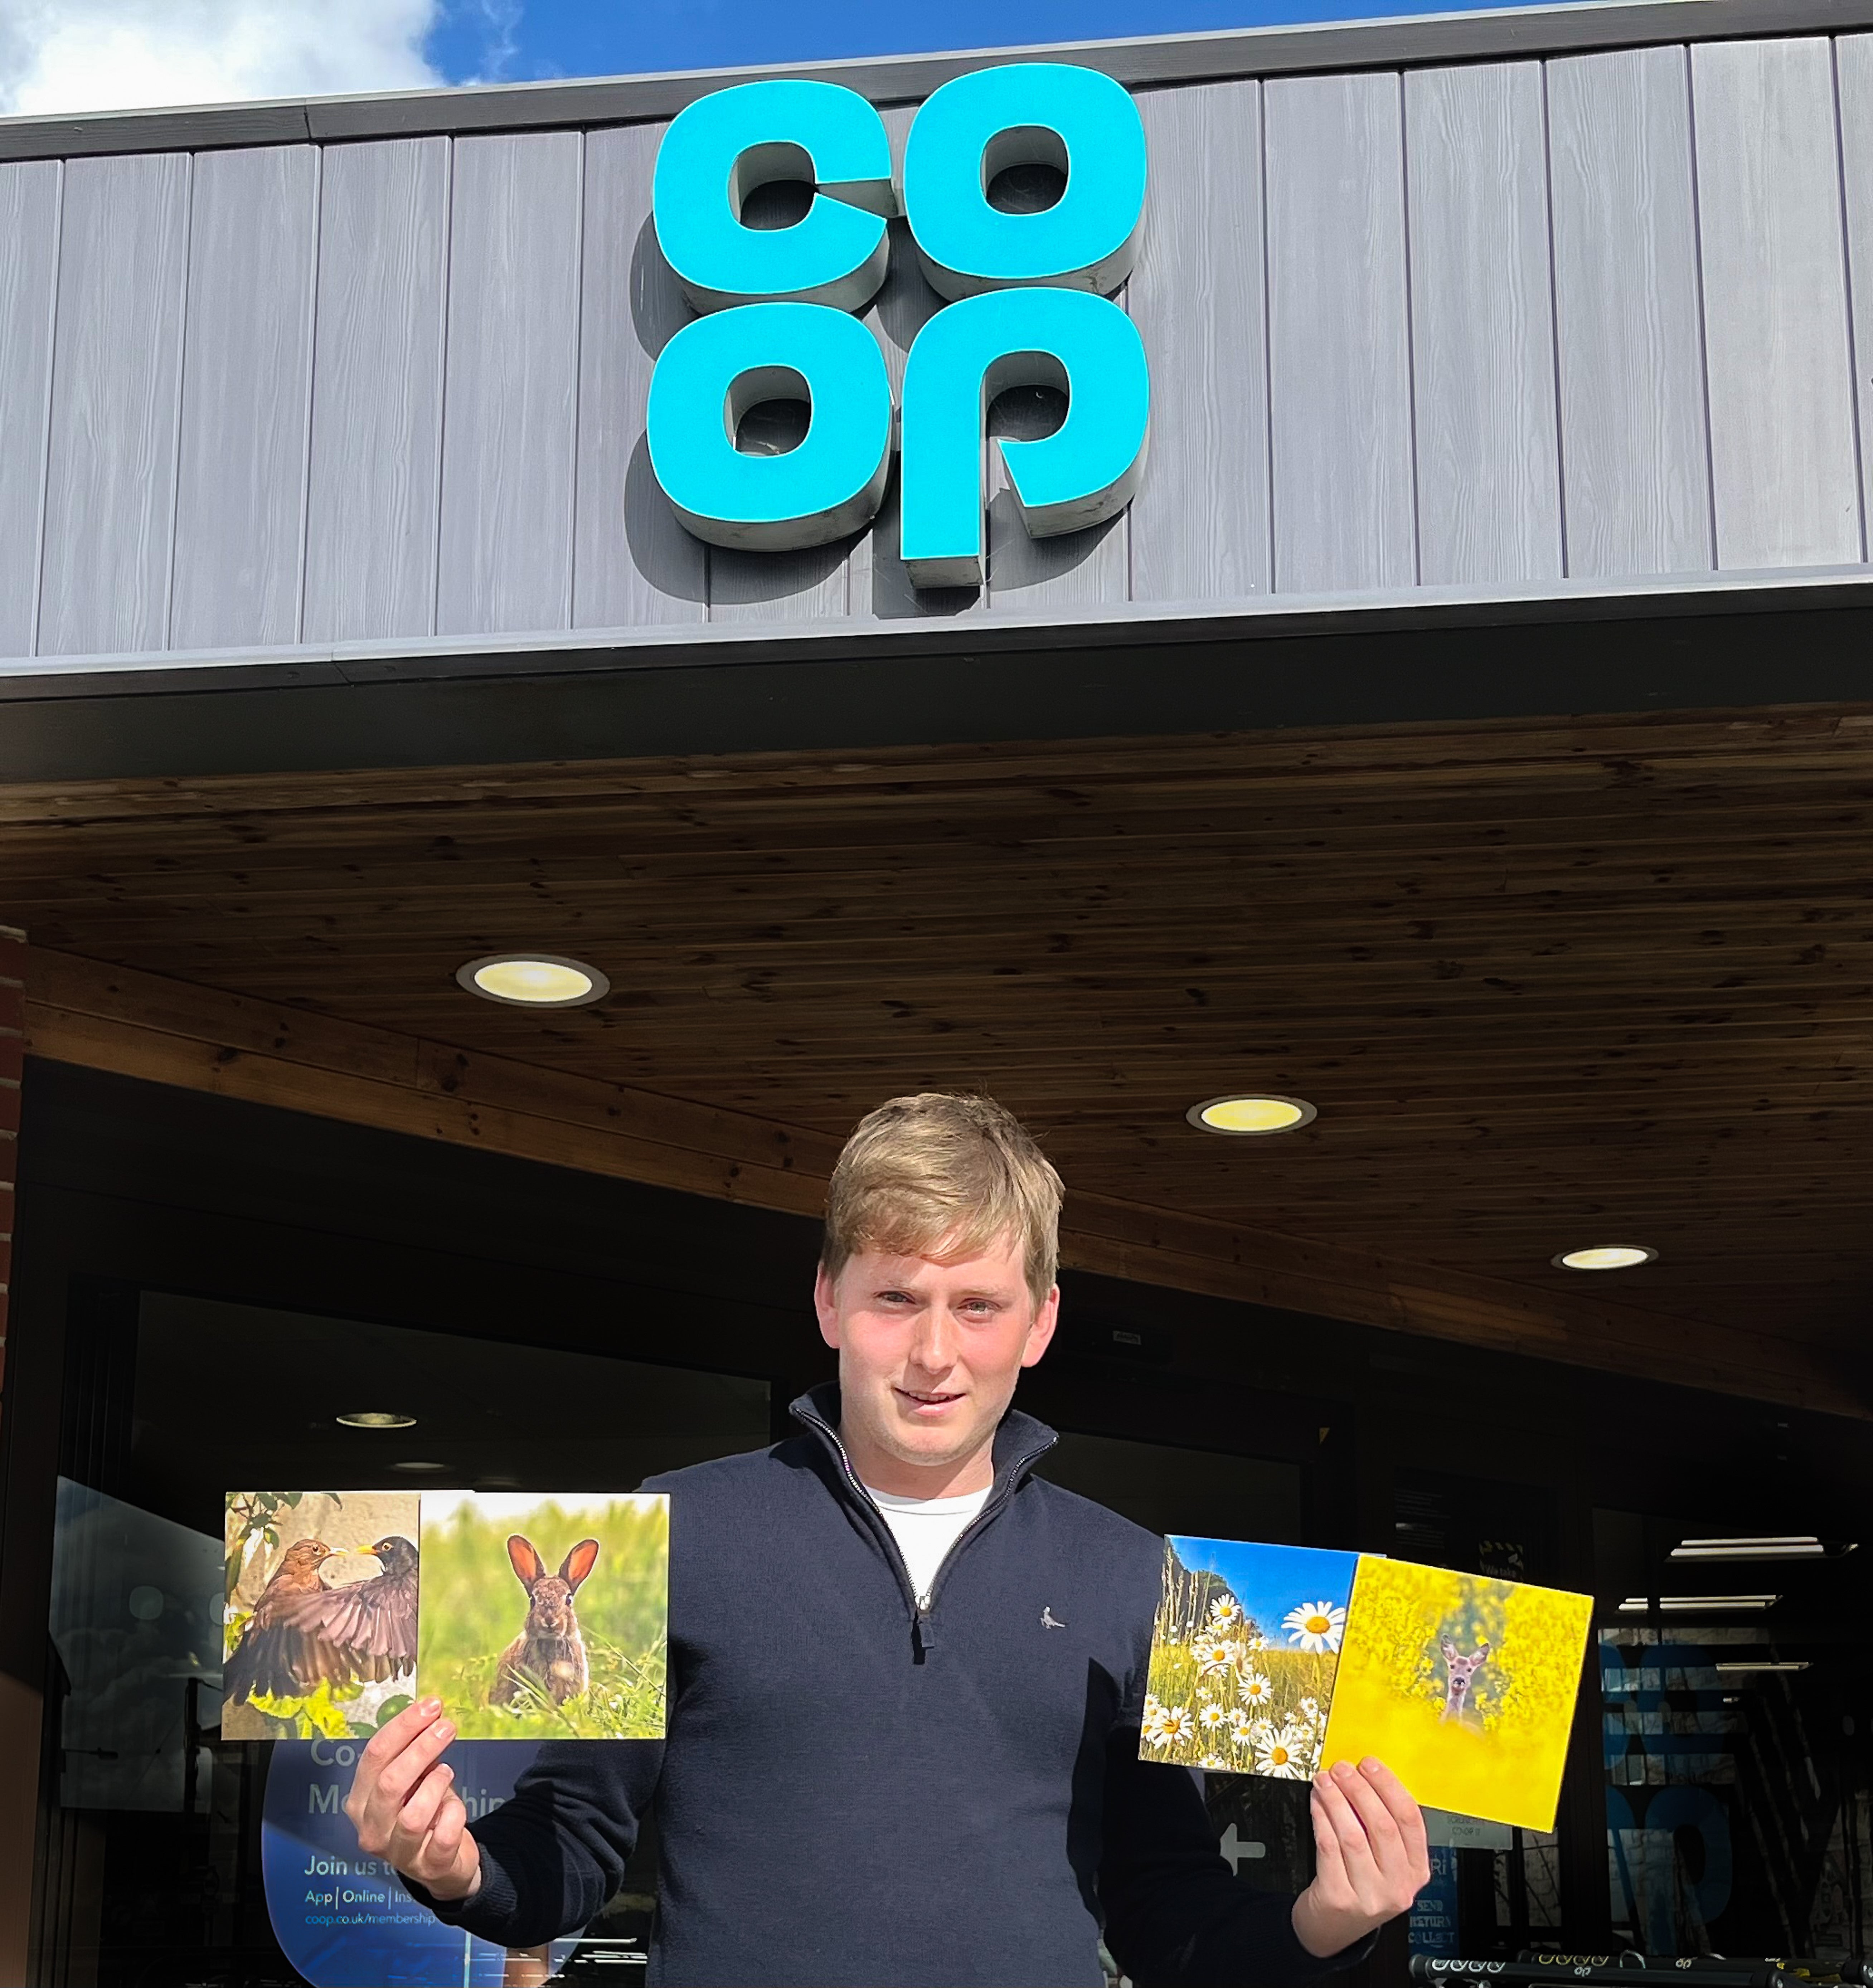 The cards will be launched in 1,300 stores and the Co-op will donate ?10,000 to the RSPB